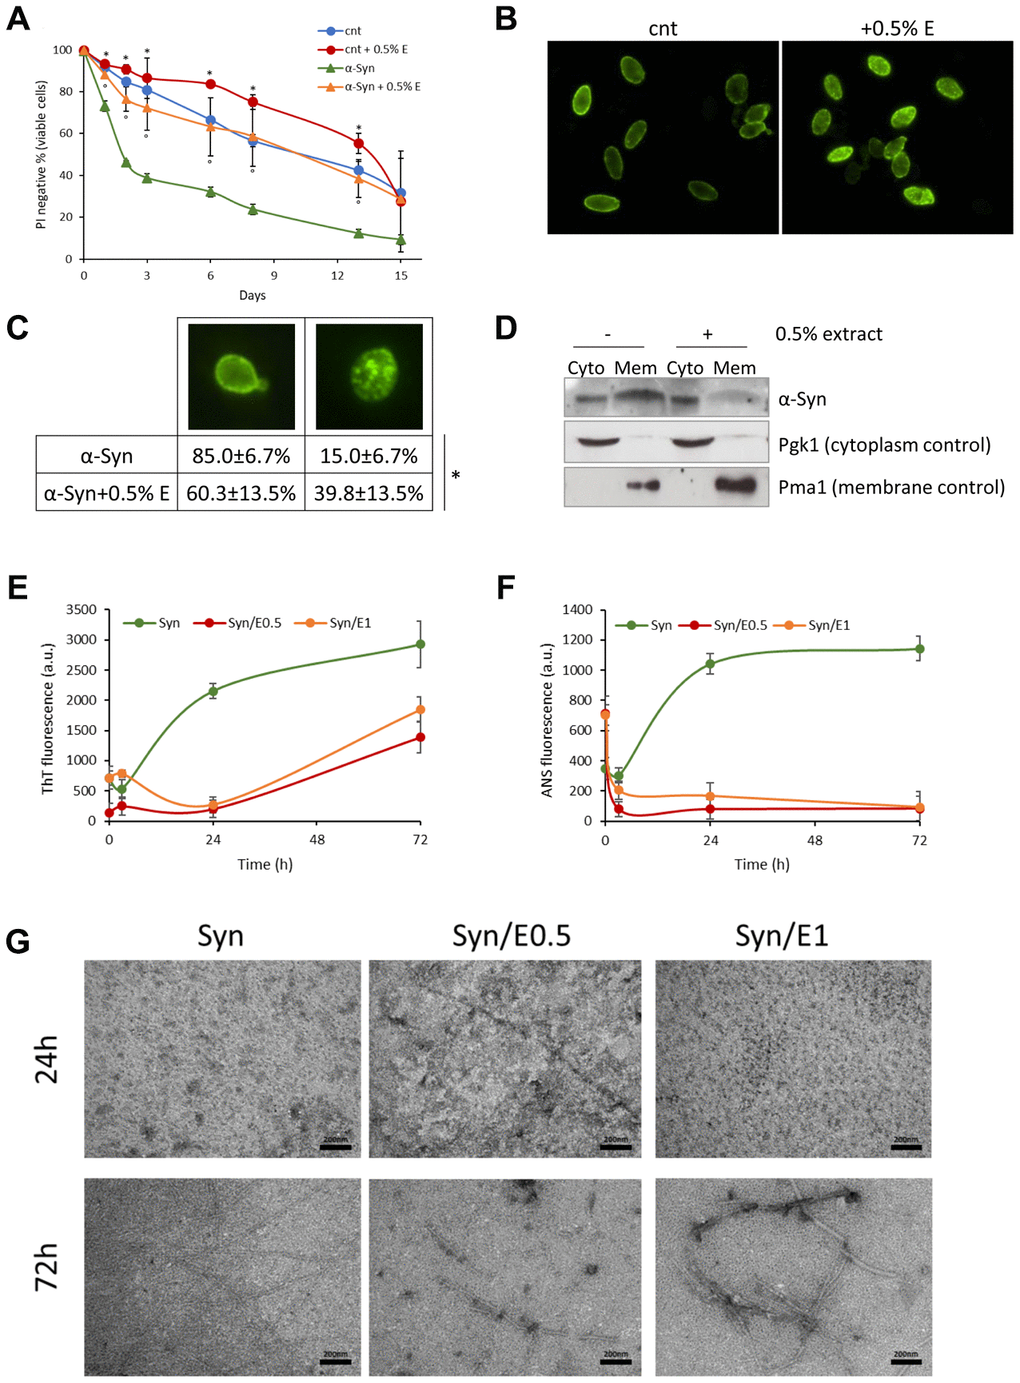 Cowpea extract reduces α-synuclein toxicity and aggregation. (A) CLS of yeast cells bearing pYX242 empty vector or pYX242-SNCA plasmid grown in SD medium containing 2% glucose in the absence or presence of 0.5% V. unguiculata extract. *pB, C) Immunofluorescence showing localization of α-synuclein in cells untreated or treated for 1 day with 0.5% V. unguiculata extract. The percentage of cells with α-synuclein localized in the cellular membrane is shown in (C). *pD) Western analysis using anti-α-synuclein antibody on cytolpasmic and membrane fractions isolated from wt [pYX242-SNCA] cells after 1-day treatment with 0.5% V. unguiculata extract. Pgk1 was used as cytoplasmic marker, Pma1 as membrane marker. (E, F) α-synuclein aggregation process followed by ThT fluorescence (E) and ANS binding (F) assays. (G) TEM pictures taken from α-synuclein aggregation mixture after 24 h and 72 h of incubation in the absence or in the presence of cowpea extract at molar ratio protein:extract 1:0.5 (E0.5) and 1:1 (E1); scale bars are shown.